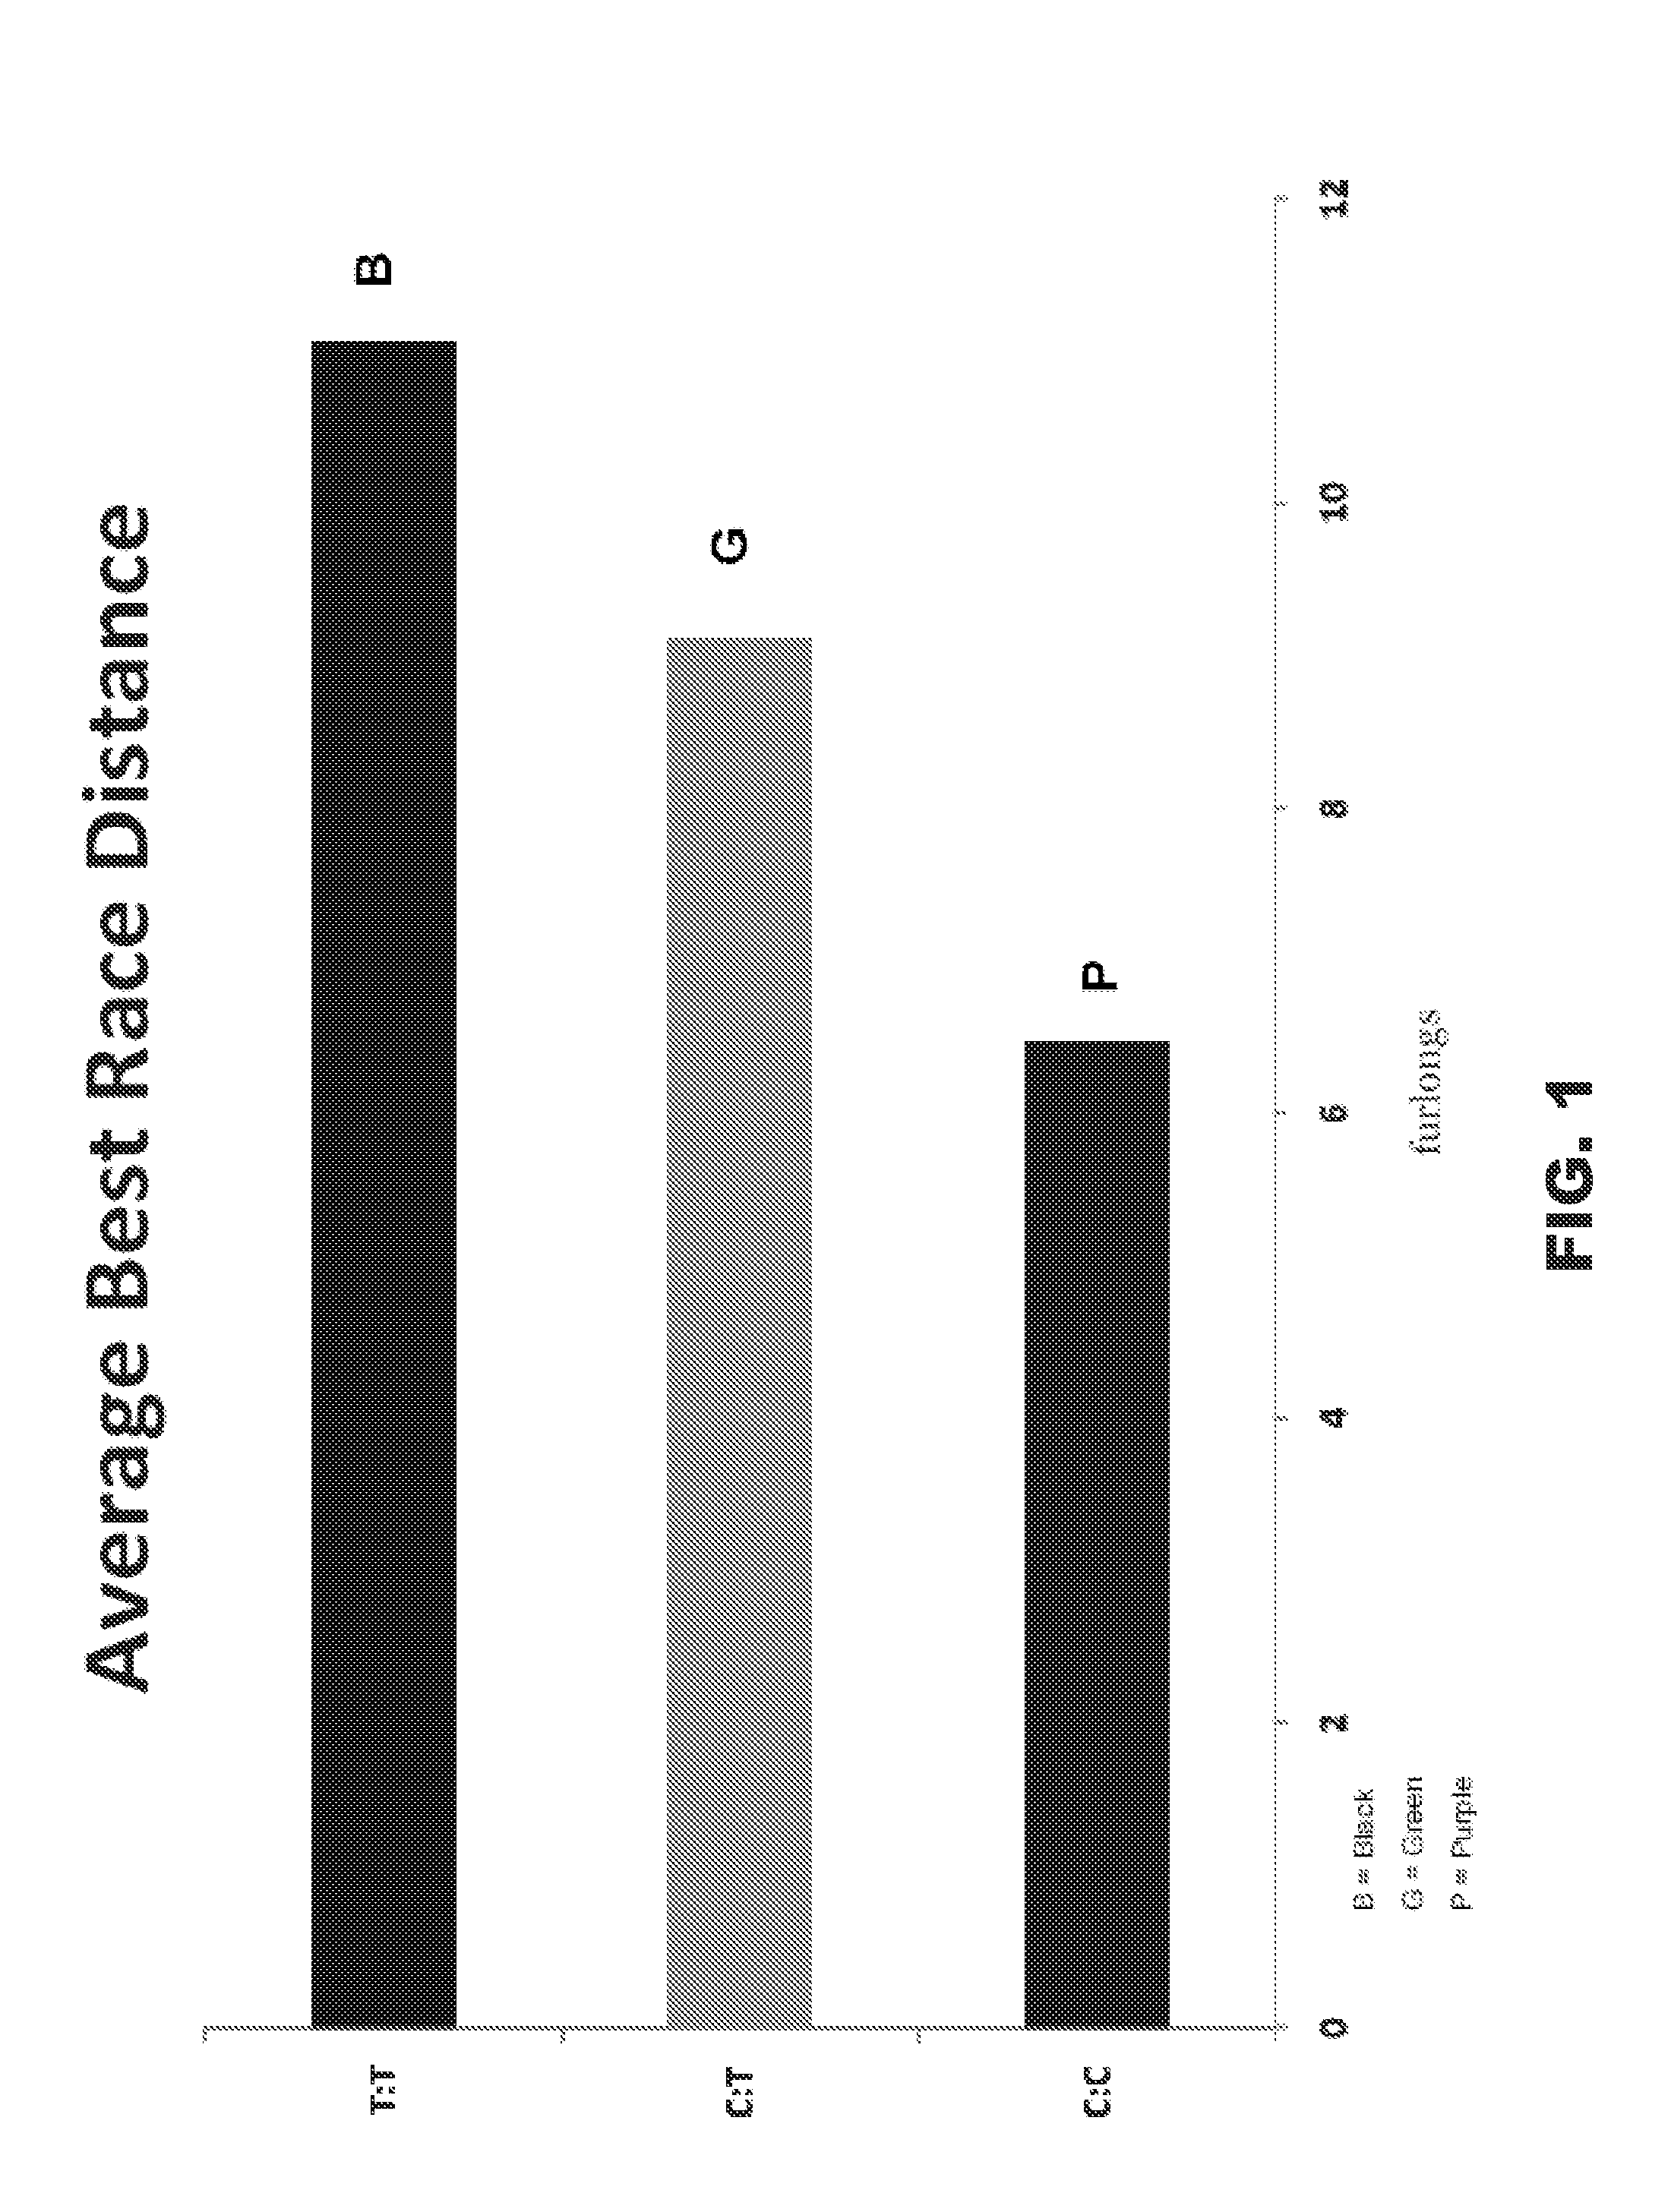 Method for predicting the athletic performance potential of a subject